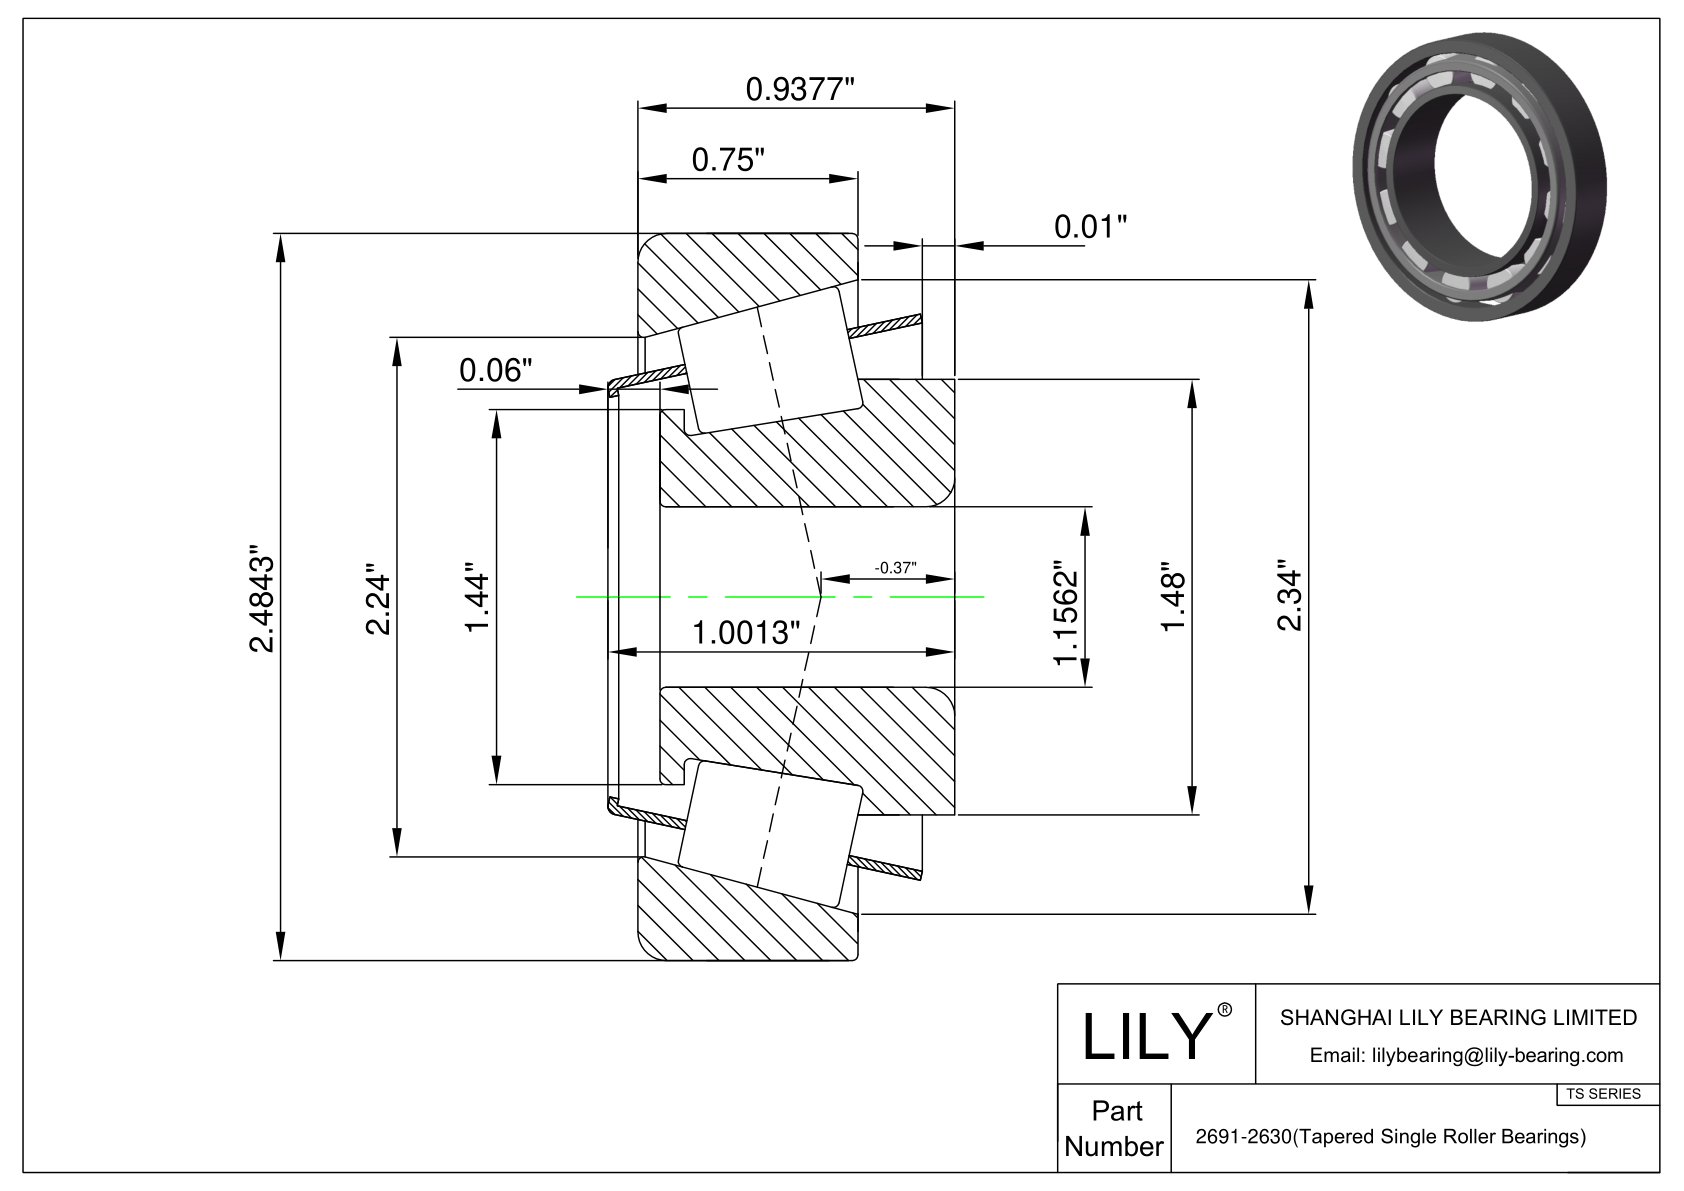 2691-2630 TS (Tapered Single Roller Bearings) (Imperial) cad drawing